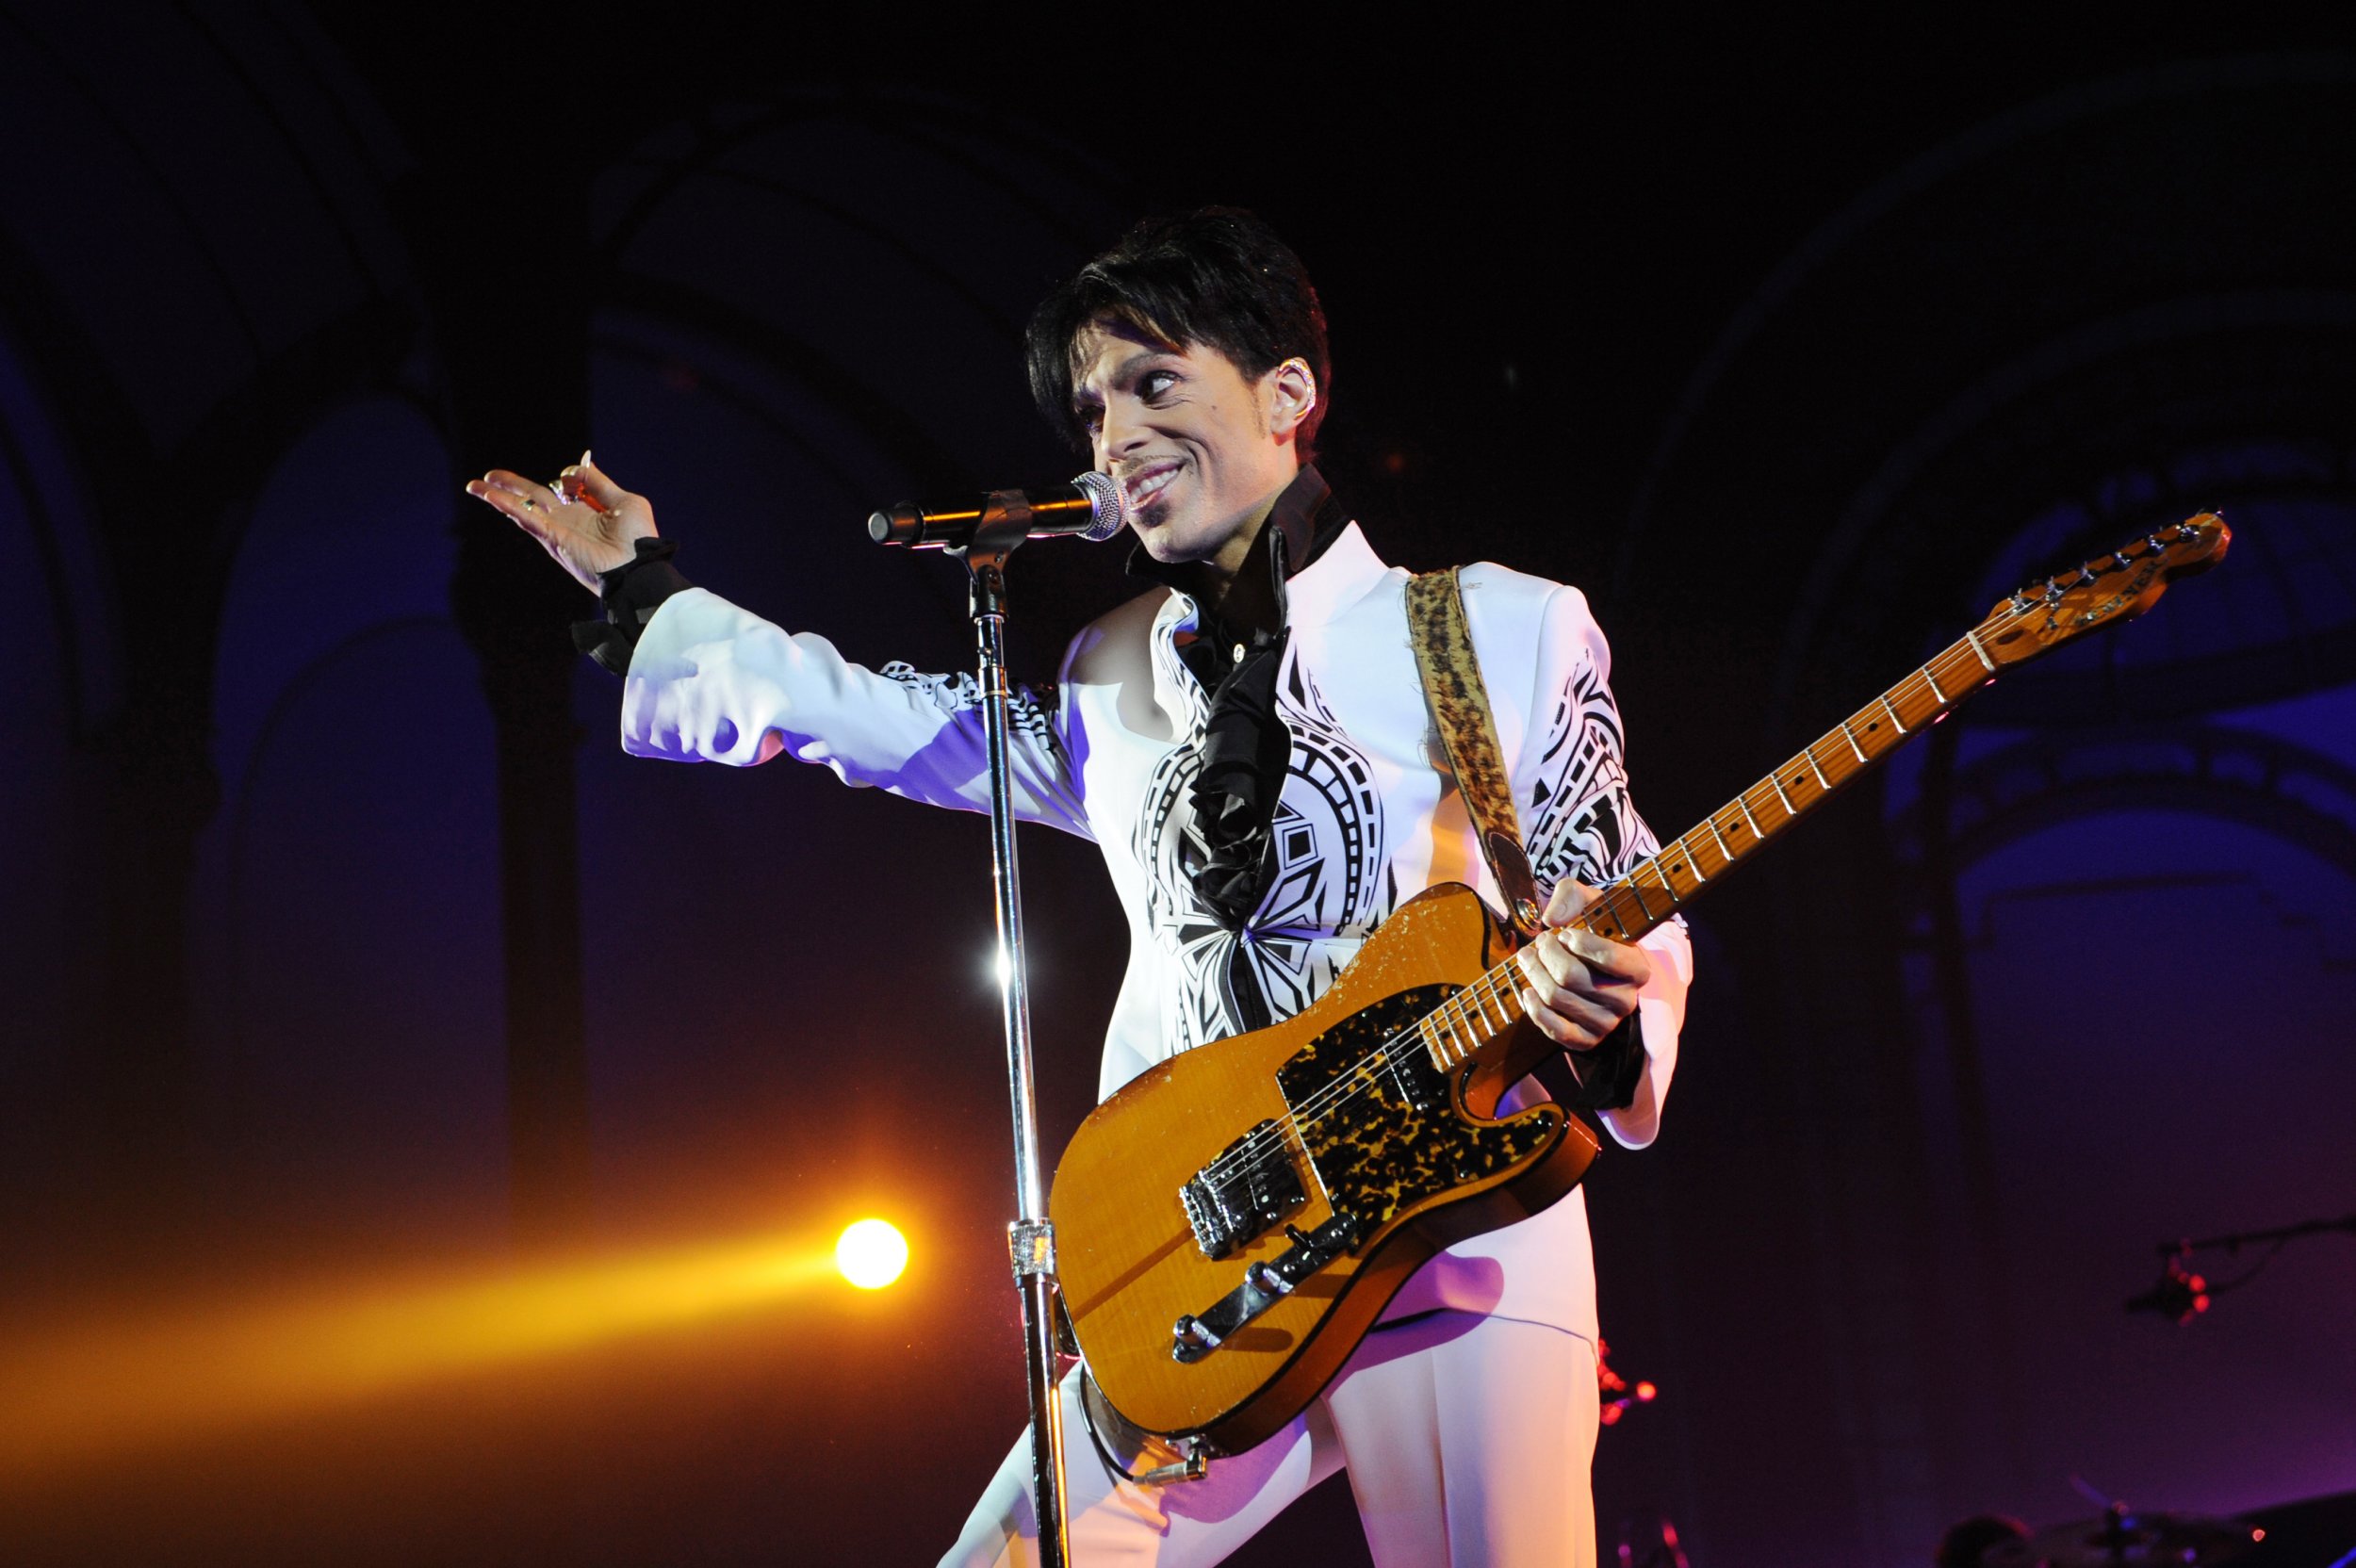 Prince in 2009